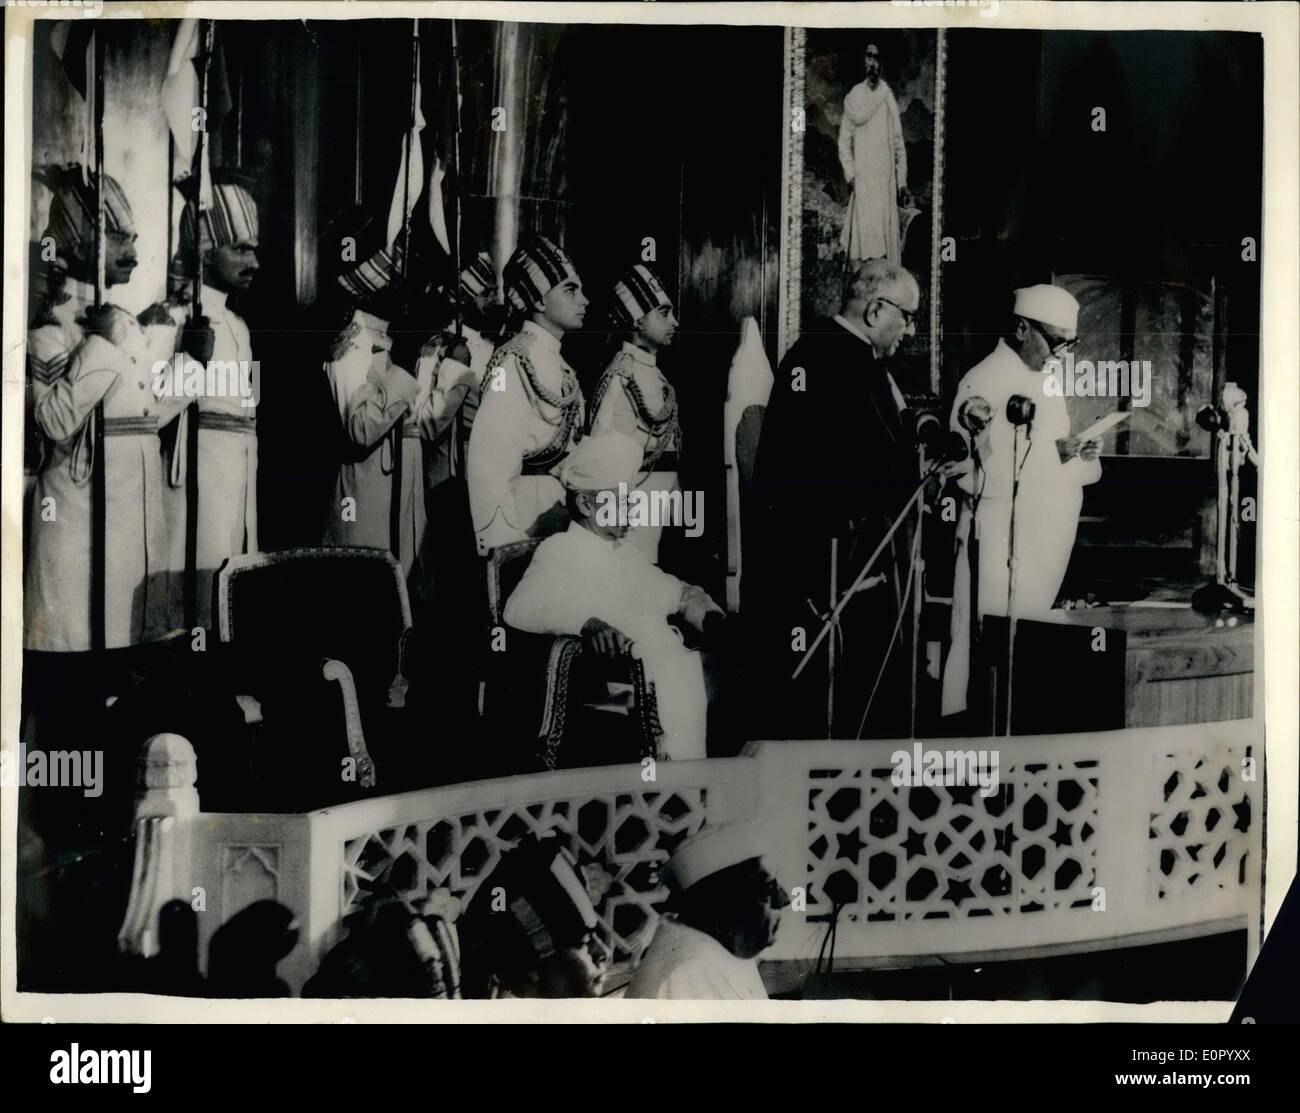 May 16, 1957 - 16-5-57 Indian President takes oath of office. Mr. S.R. Das, Chief Justice of India, administering the oath of office to the Indian President, Dr. Rajendra Prasad, in the Central Hall of Parliament House, New Delhi on Monday. This is Dr. Prasad second term of office. Stock Photo